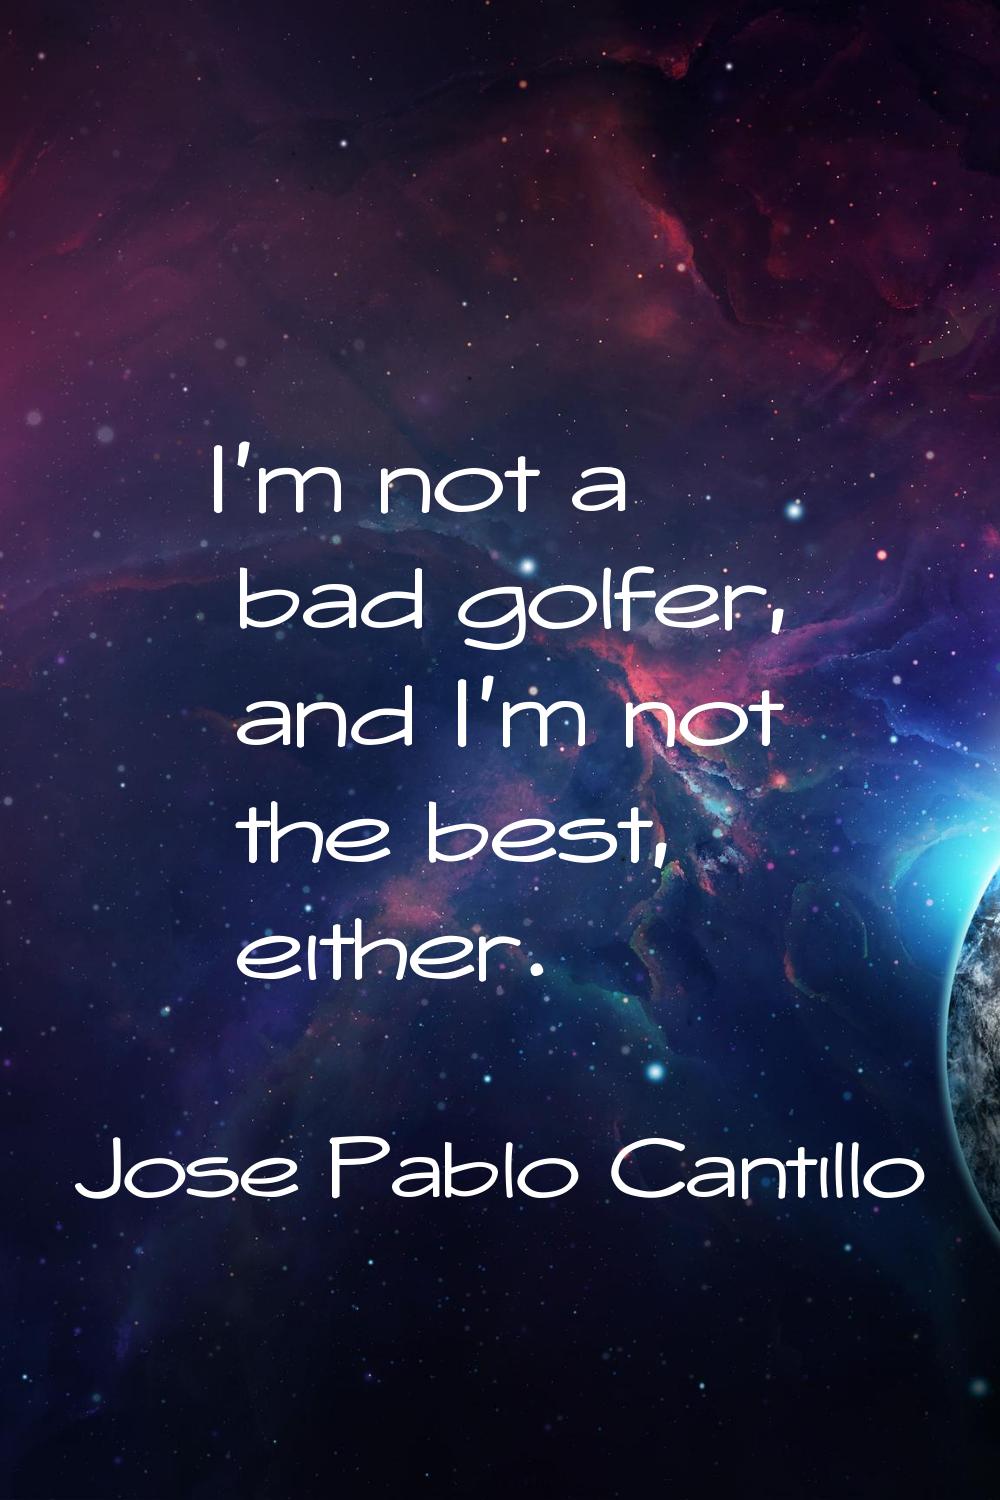 I'm not a bad golfer, and I'm not the best, either.